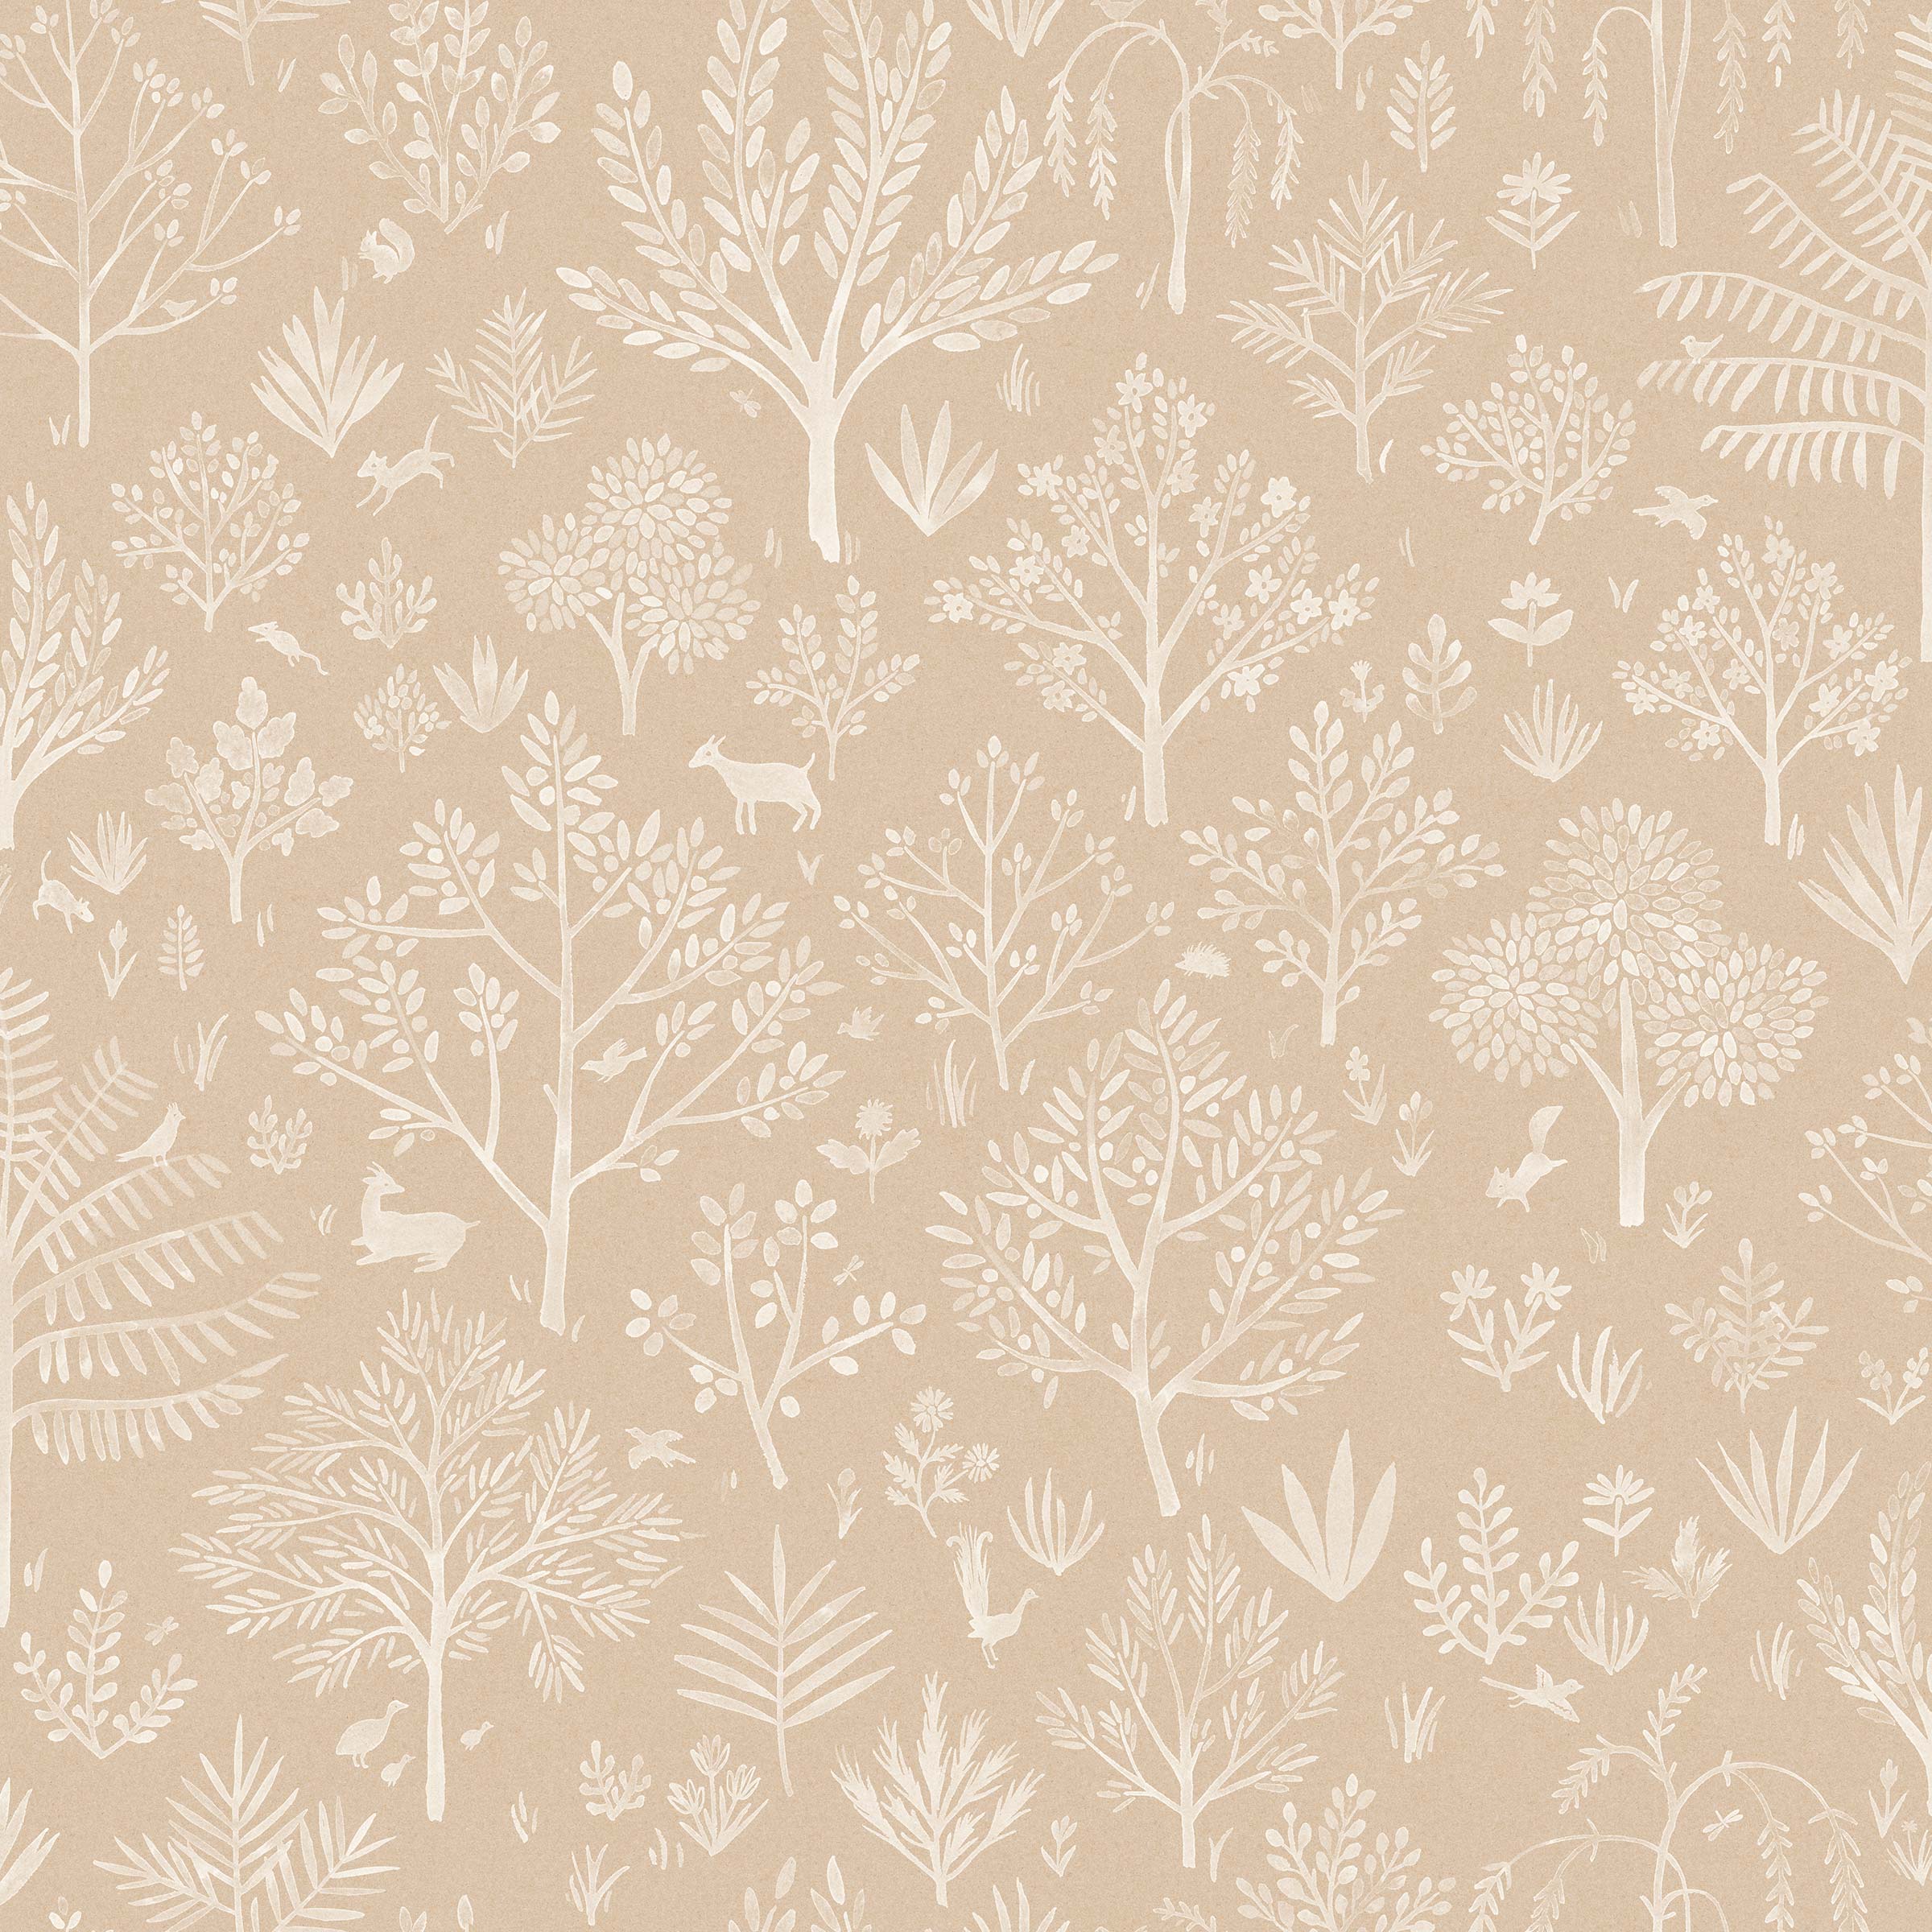 Detail of wallpaper in a playful animal and tree print in white on a tan field.